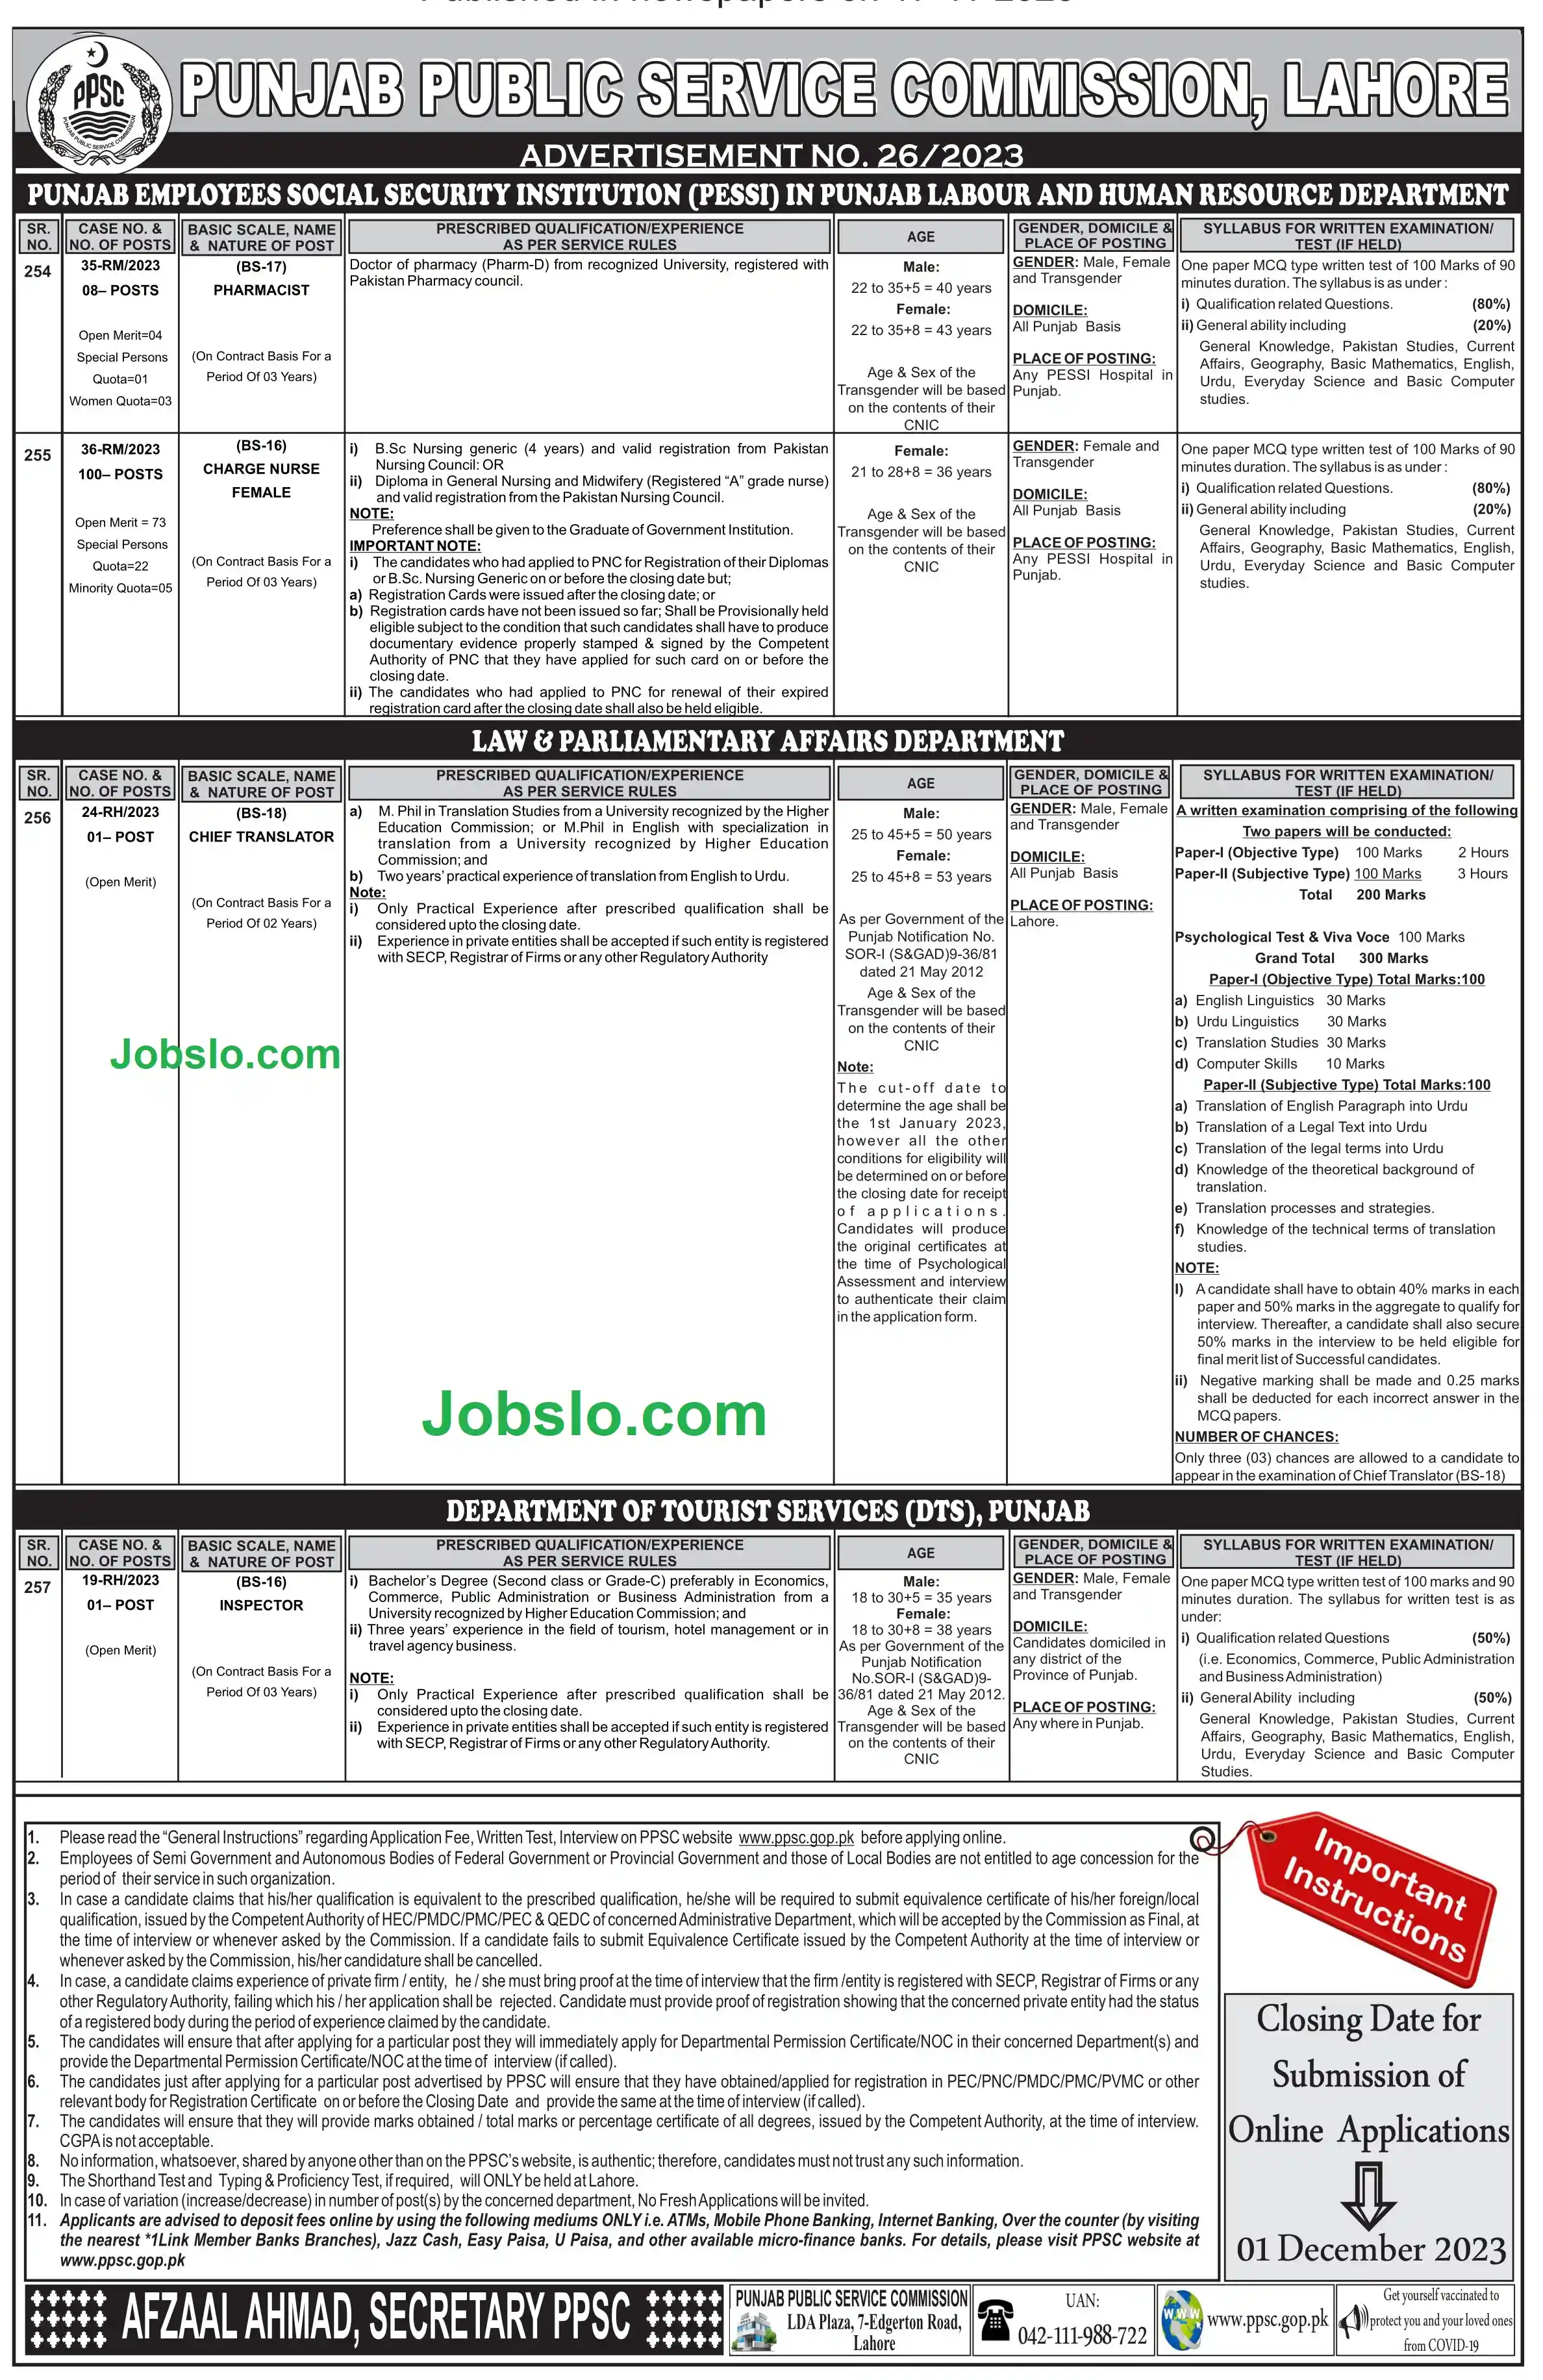 PPSC Jobs For Charge Nurse Female, Inspector & Others - Apply Here Advertisement